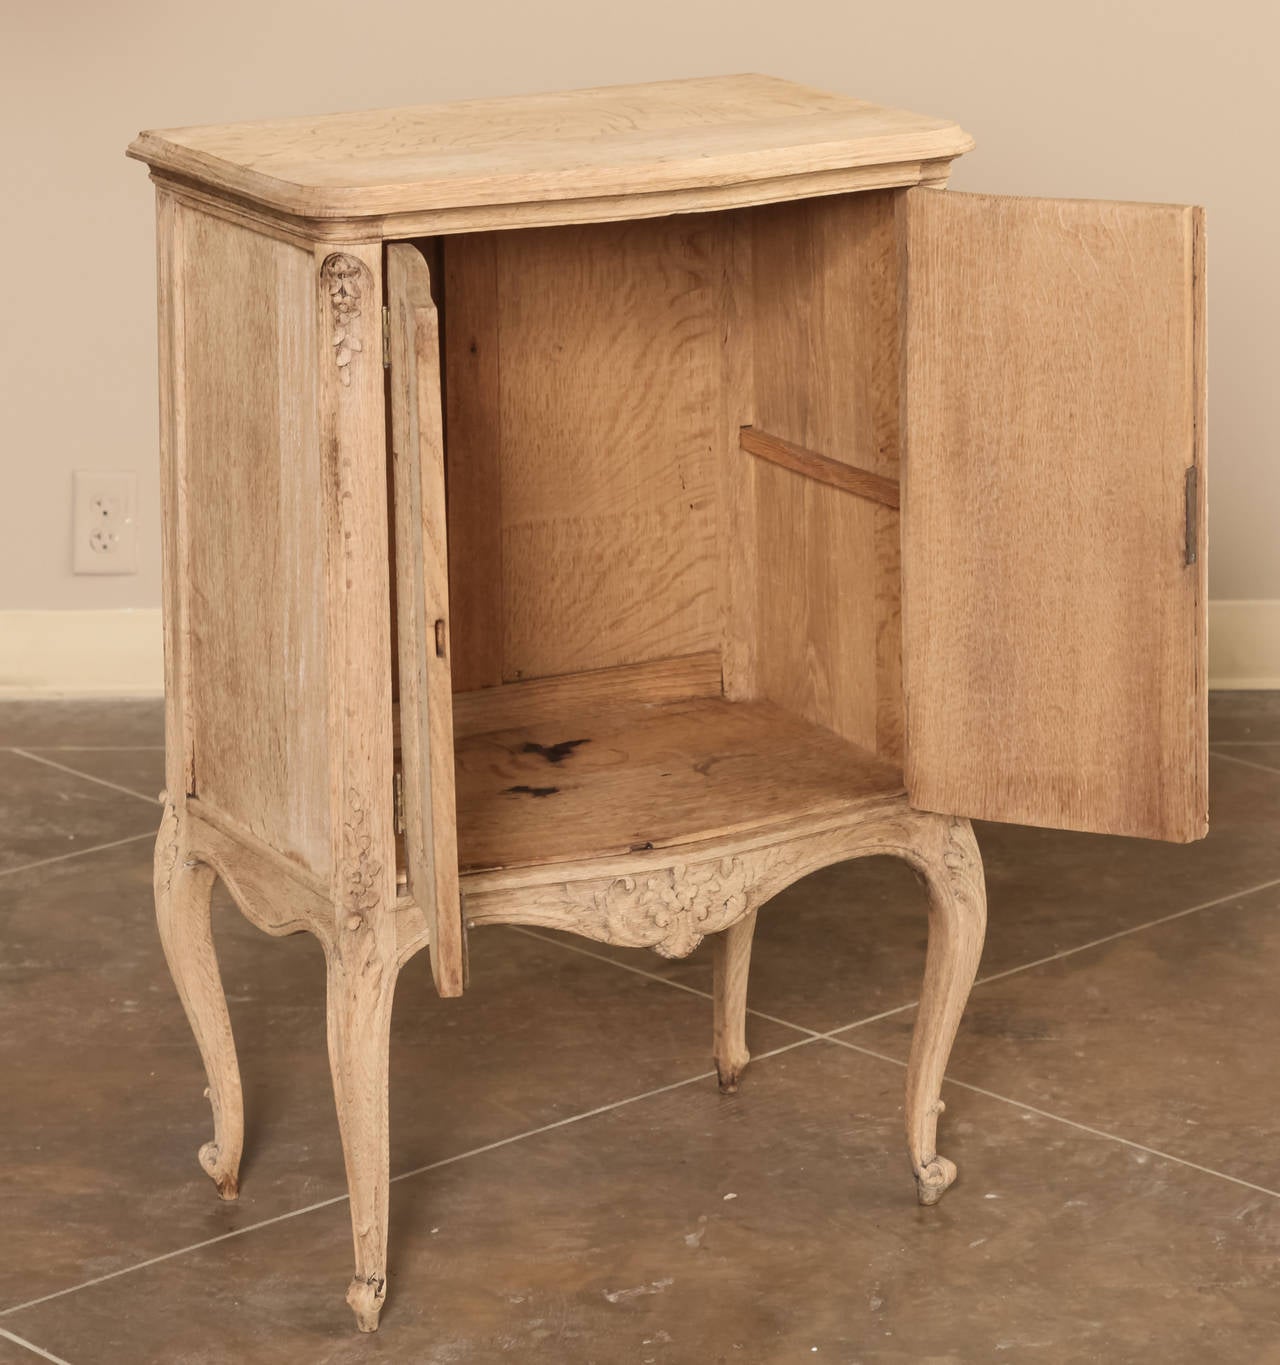 Hand-carved to perfection by talented artisans, this petite stripped oak Country French buffet, called a confiturier in France, features carved musical instruments  on each door bursting with ribbons and romantic motifs, in deference to Queen Marie